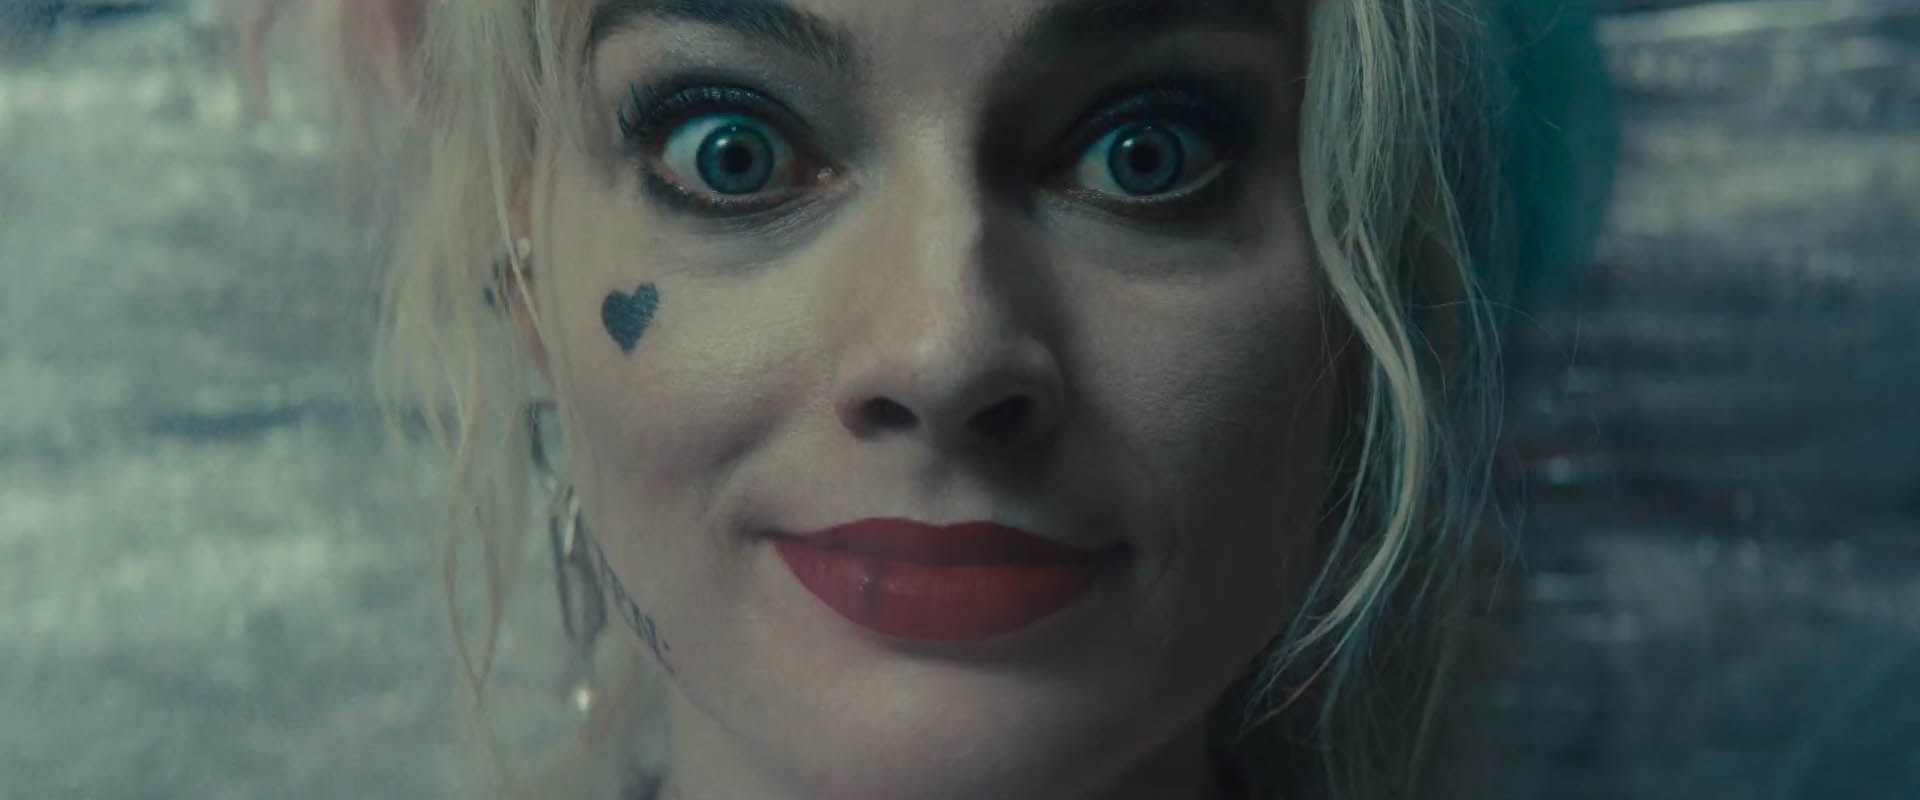 The Suicide Squad set photo offer better look at Harley Quinn